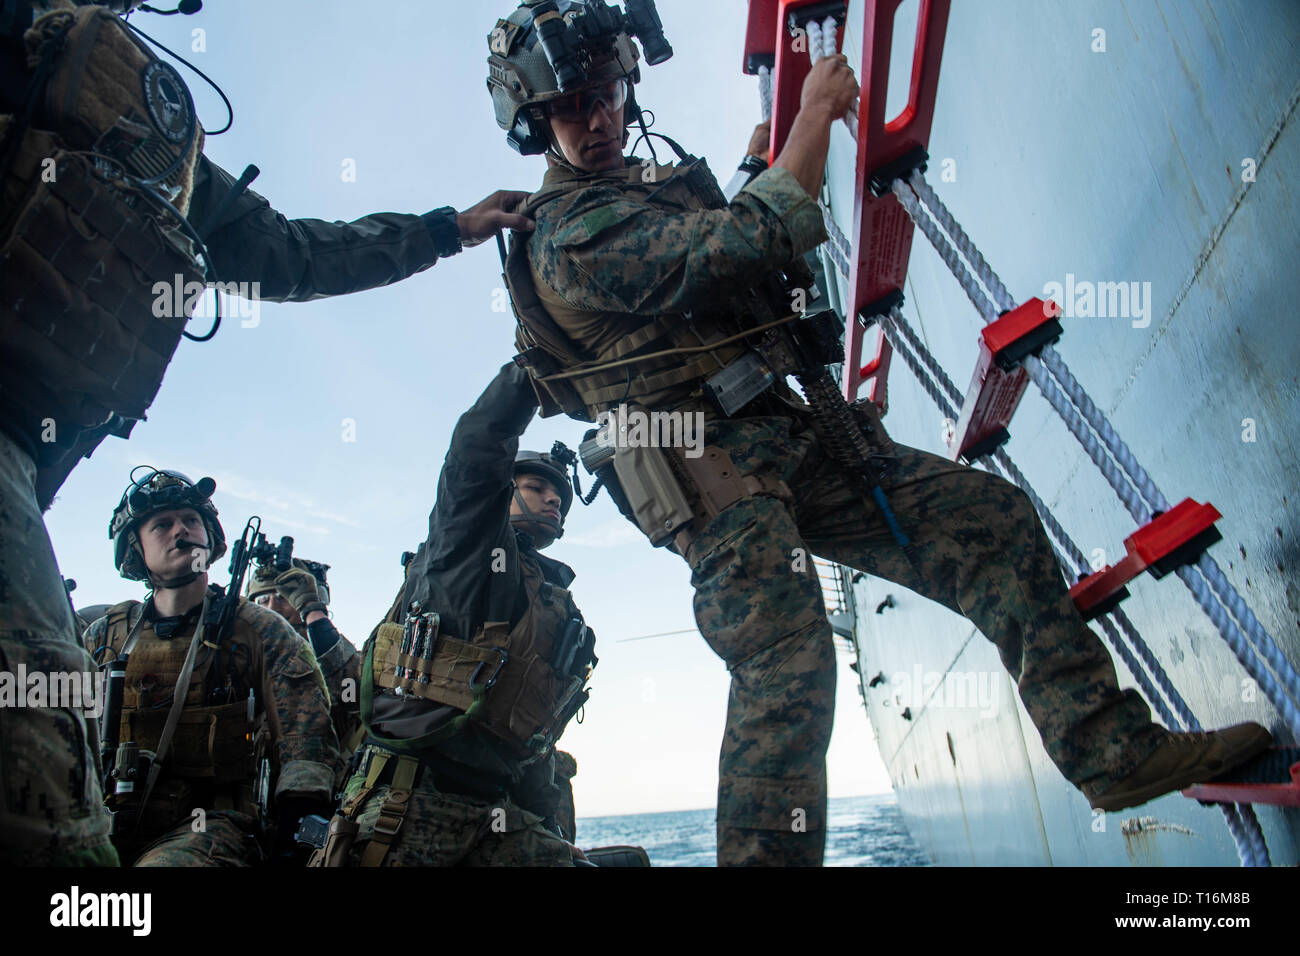 190322-N-HD110-0151  PACIFIC OCEAN (March 22, 2019) Sailors assigned to Assault Craft Unit (ACU) 1 assist a Marine assigned to Maritime Raid Force (MRF) down a pilot’s ladder and into a rigid-hull inflatable boat off the port side of Harpers Ferry-class amphibious dock landing ship USS Harpers Ferry (LSD 49) during a visit, board, search, and seizure exercise. Harpers Ferry is underway conducting routine operations as a part of USS Boxer Amphibious Ready Group (ARG) in the eastern Pacific Ocean. (U.S. Navy photo by Mass Communication Specialist 3rd Class Danielle A. Baker) Stock Photo